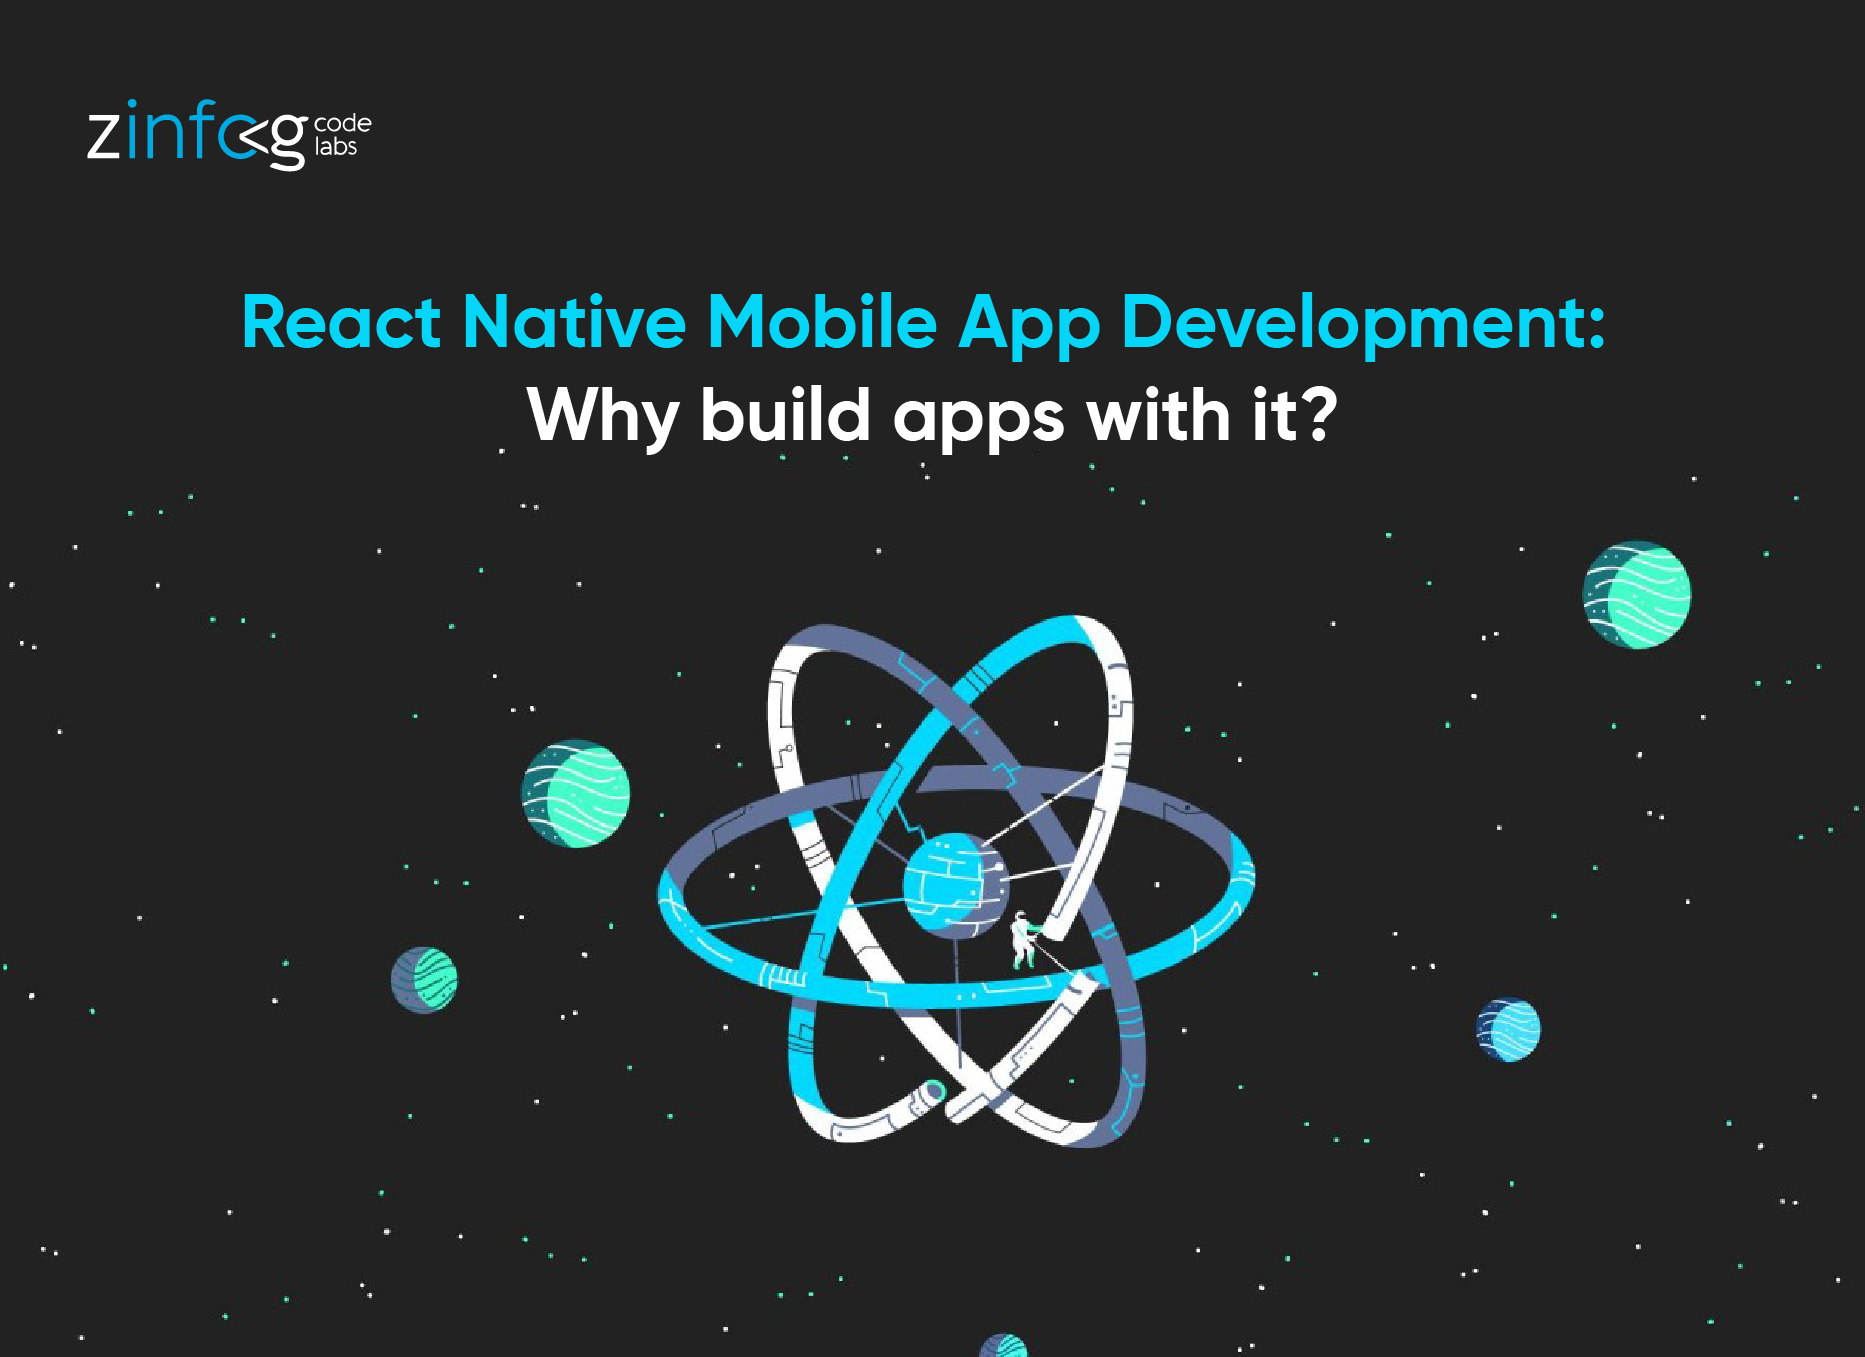 react-native-mobile-app-development-why-build-apps-with-it.html